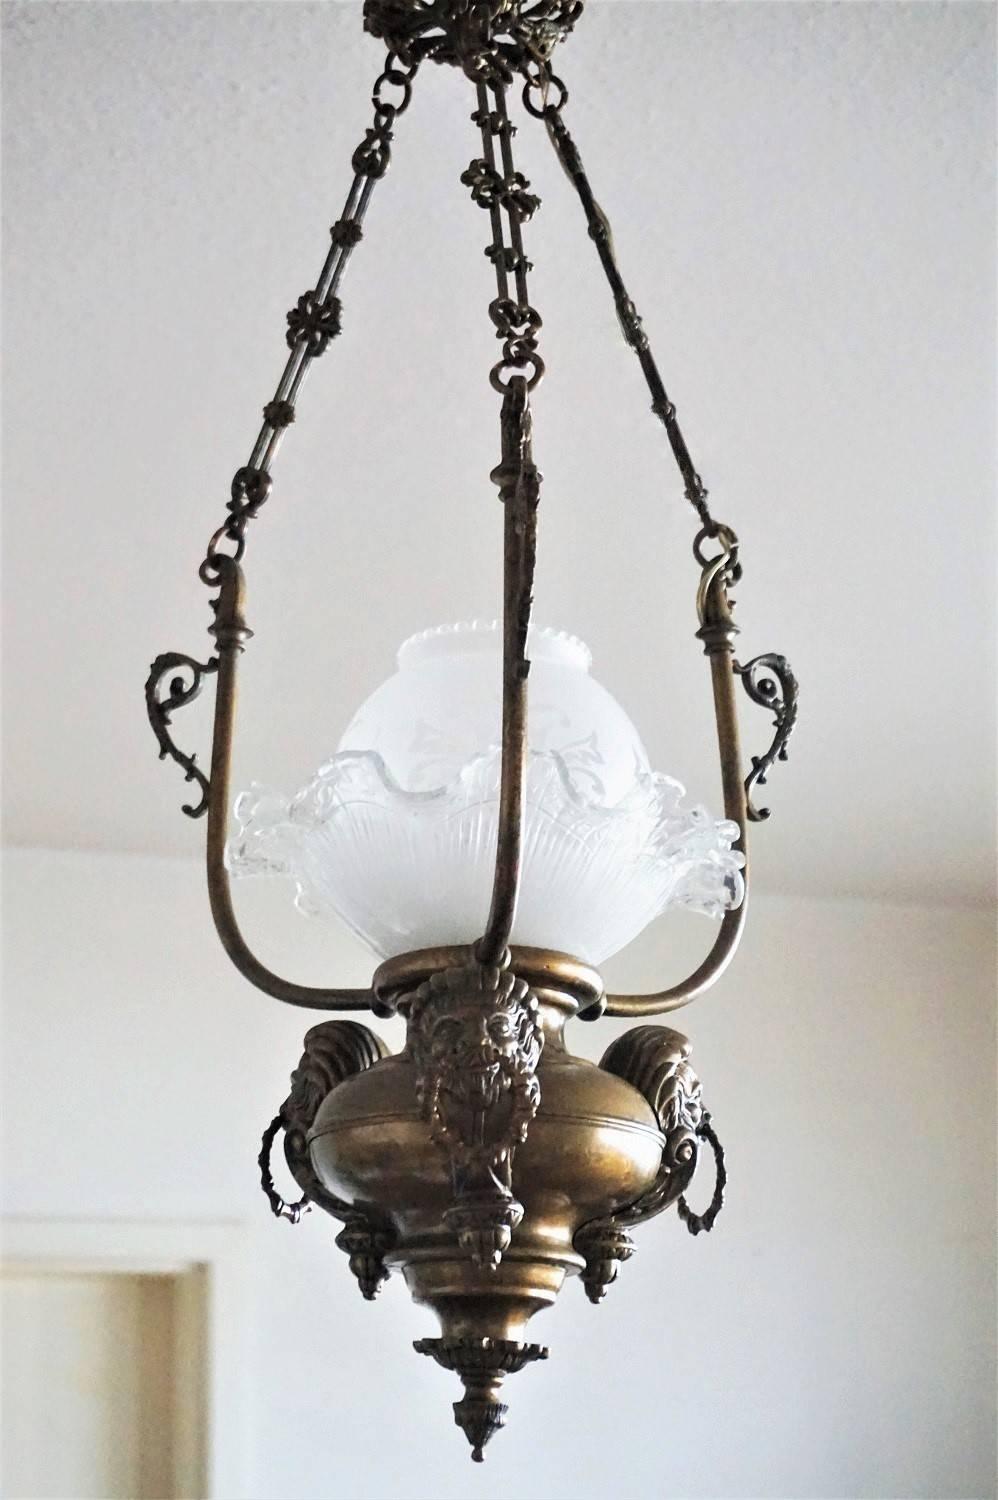 This empire style oil light has been electrifed at a later time. Brass body ornate with lion heads, three chains connecting to a decorative ceiling canopy. Beautiful two-piece etched glass shade, single large bulb socket under the glass